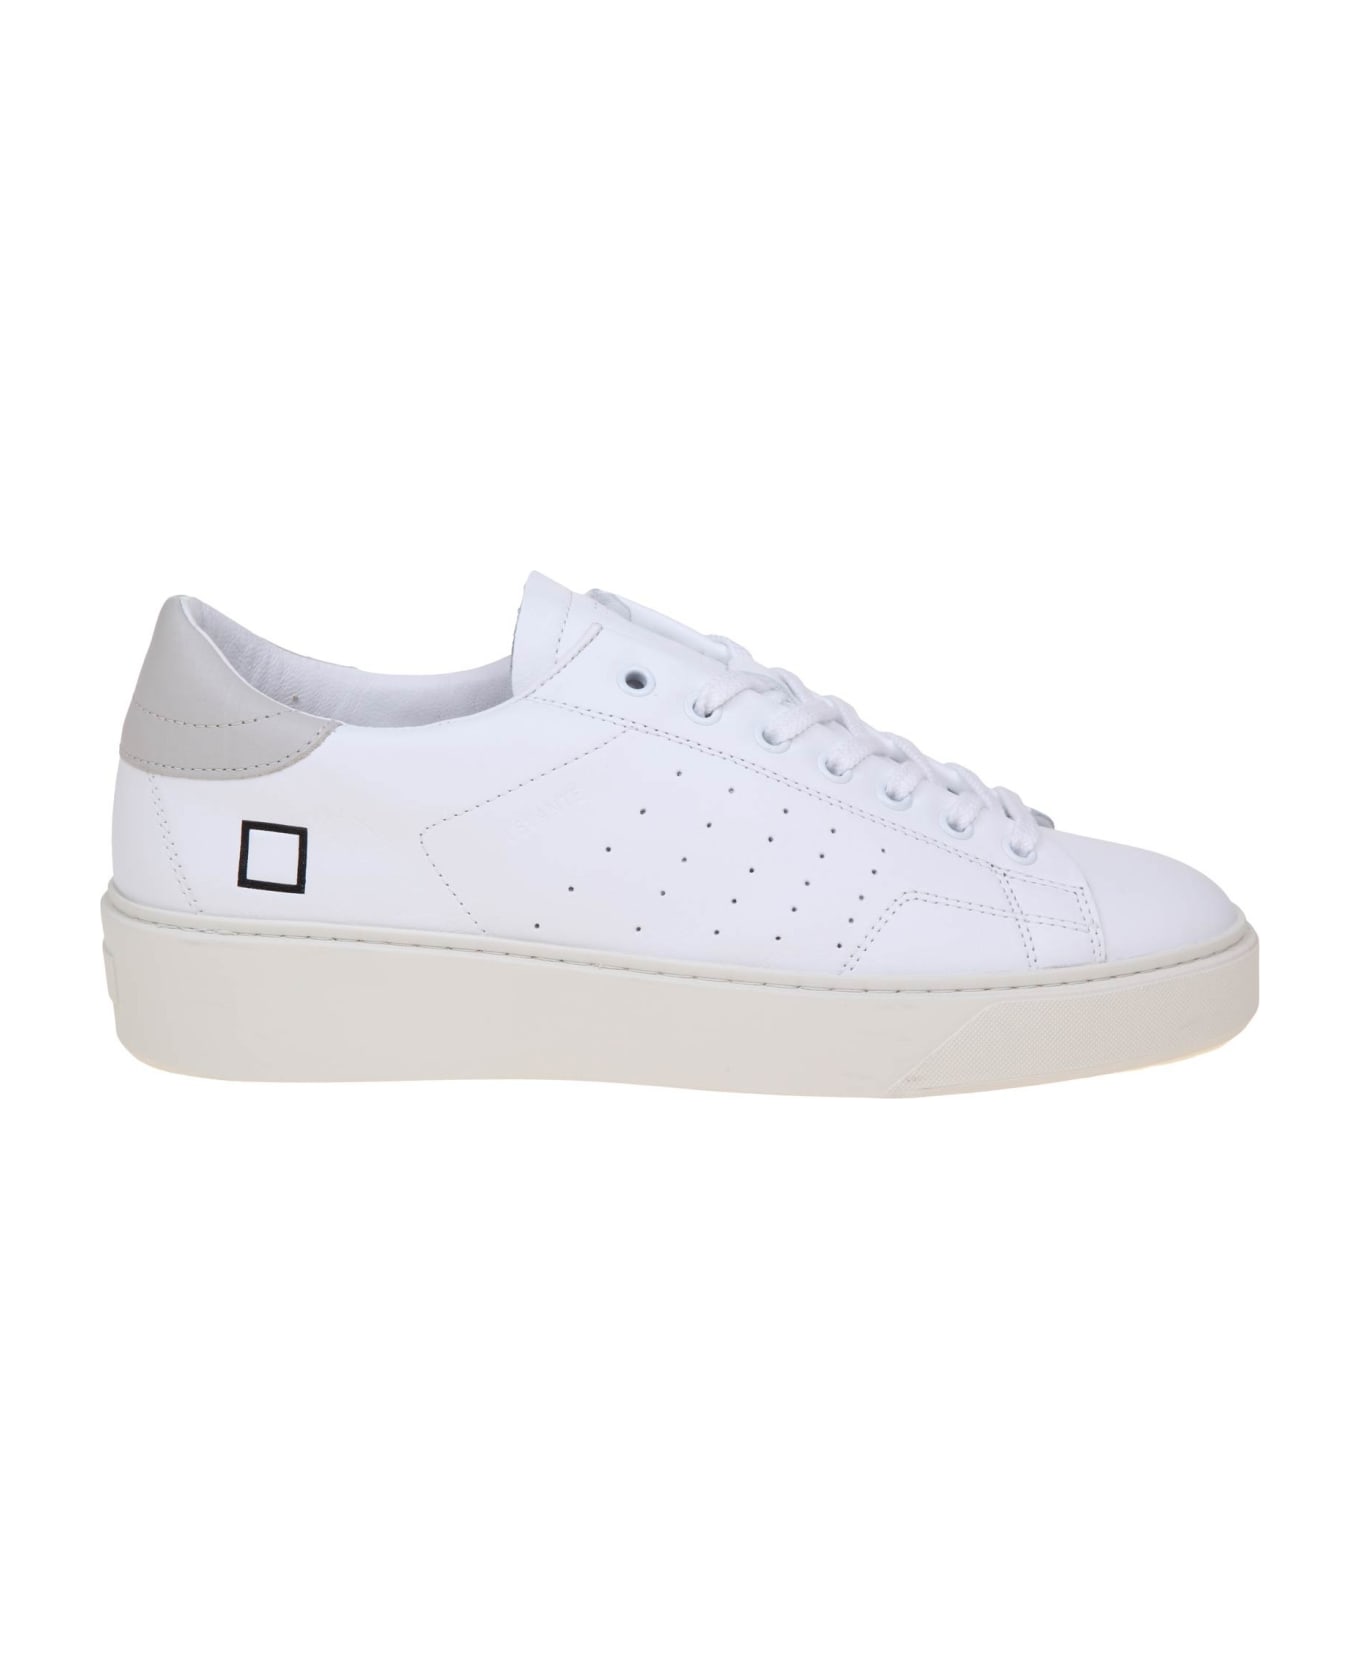 D.A.T.E. Levante In White And Gray Leather - White/Grey スニーカー